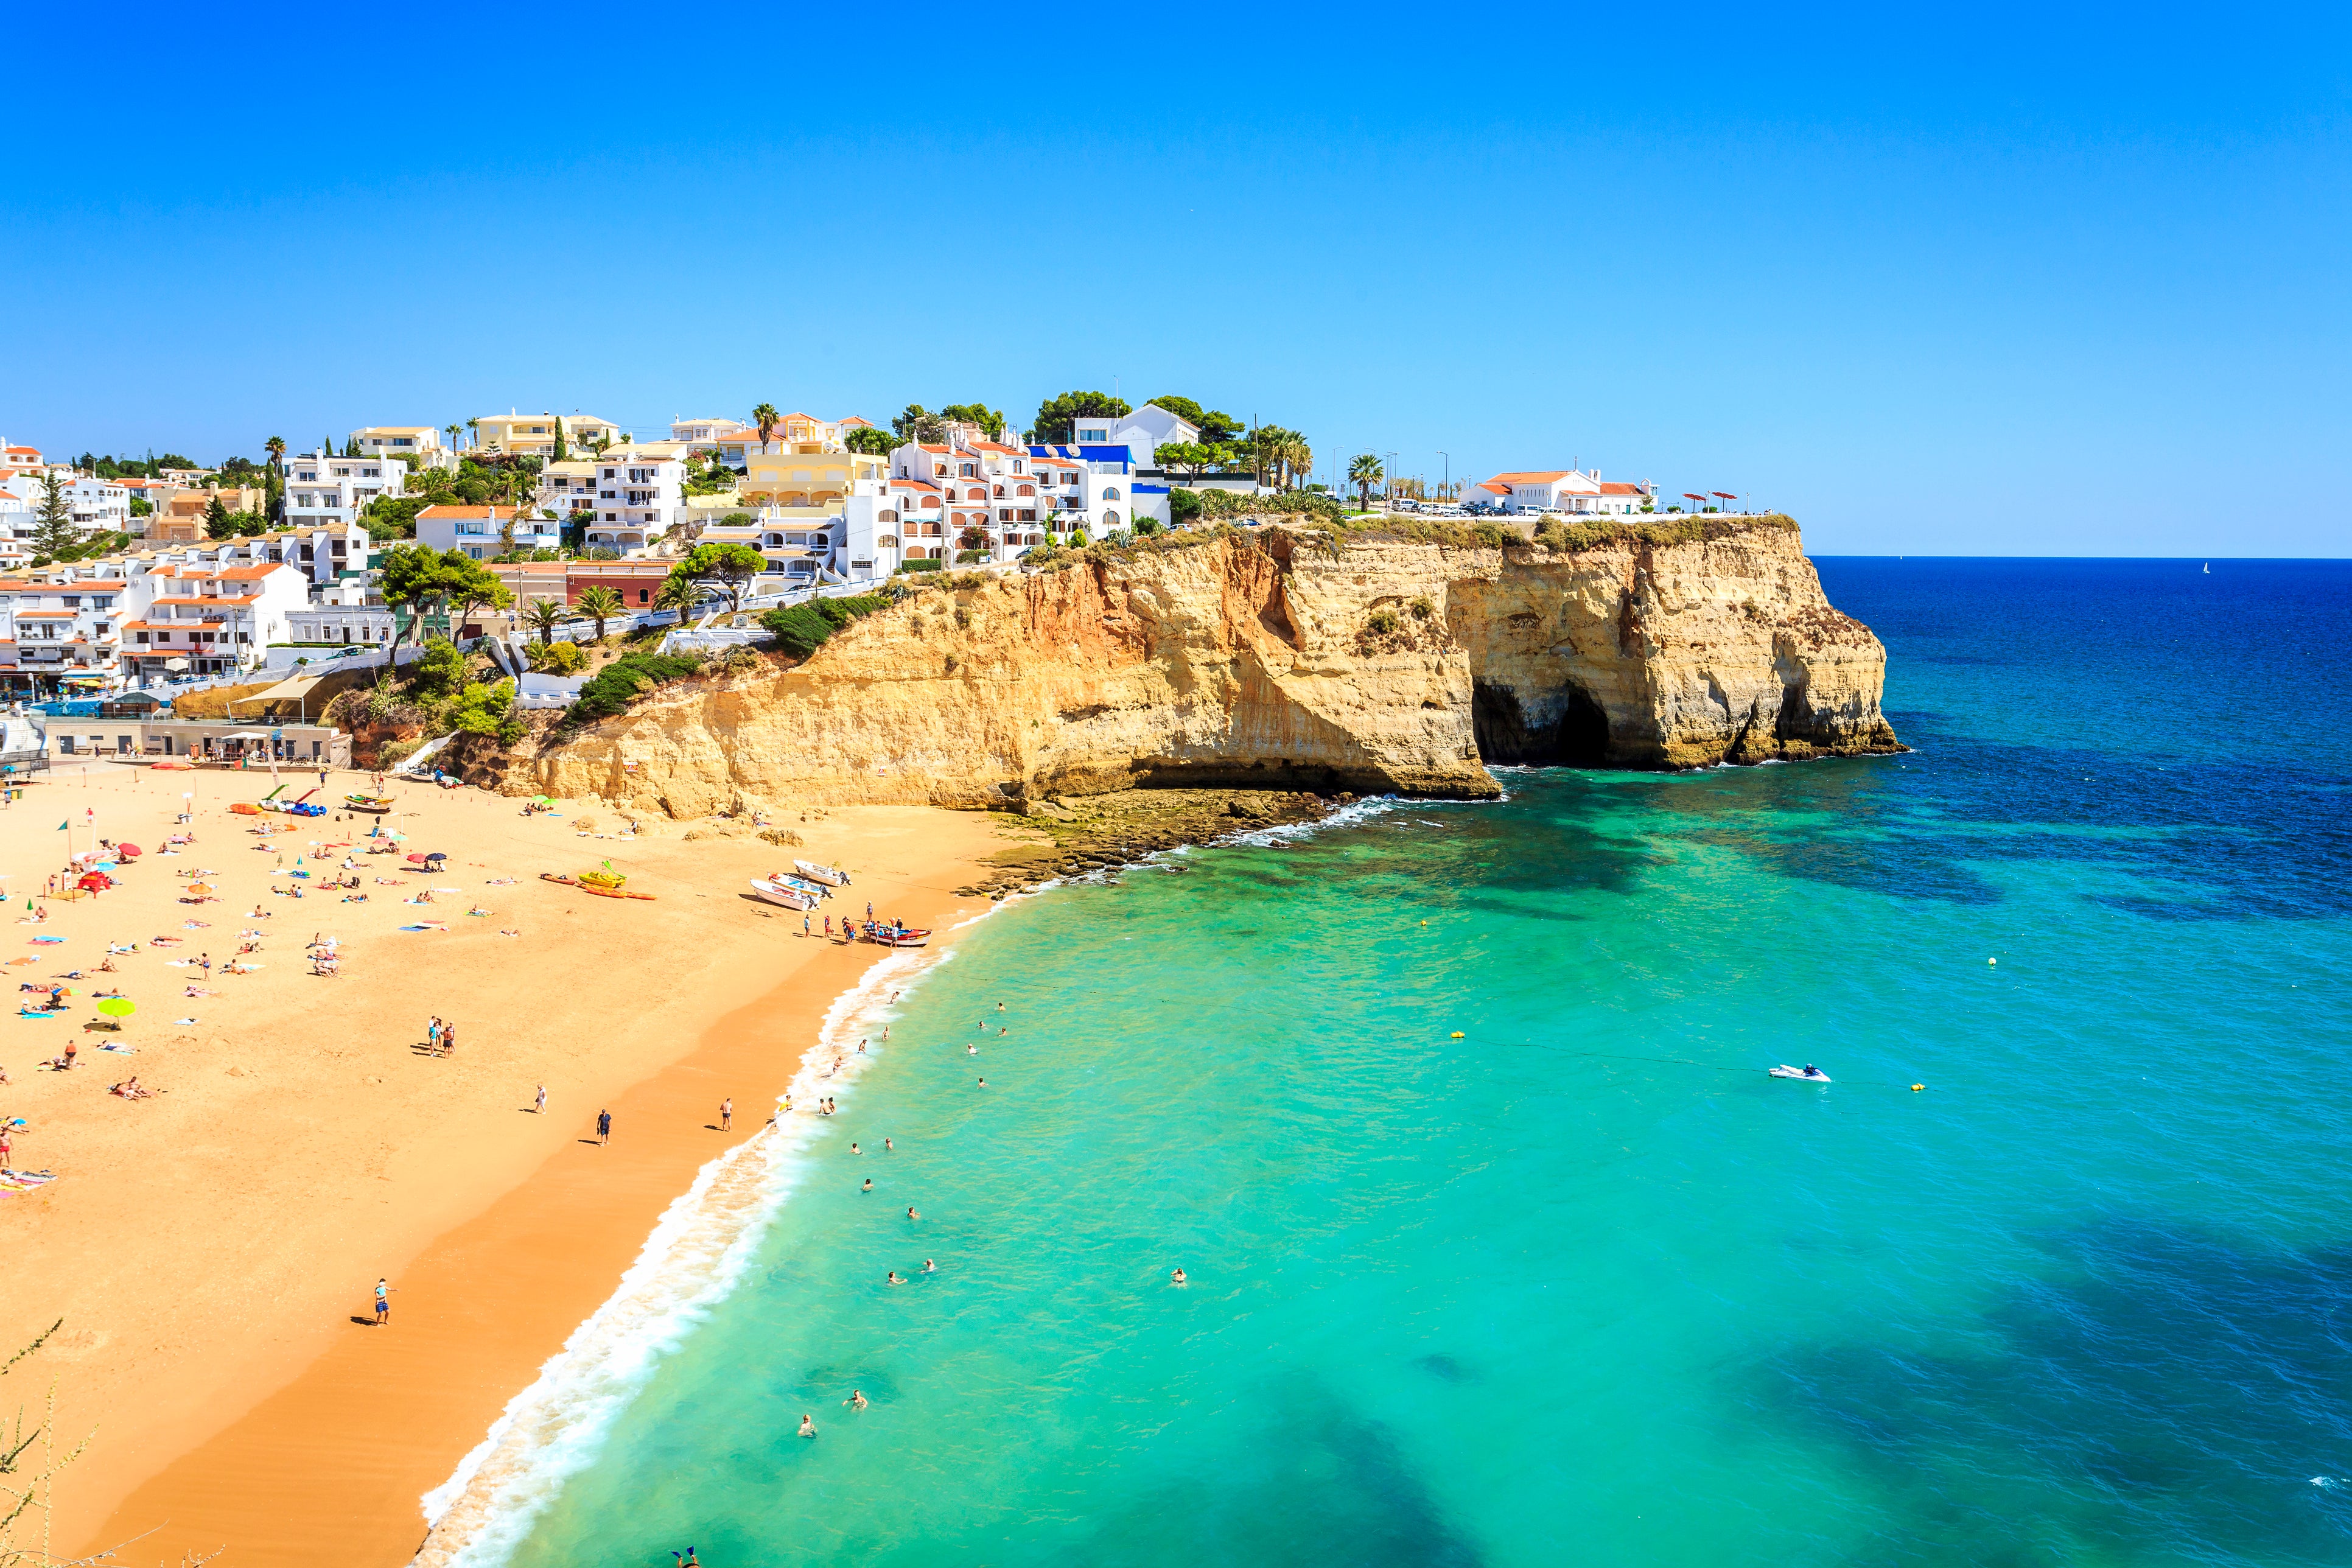 Picture perfect: Carvoeiro, Portugal